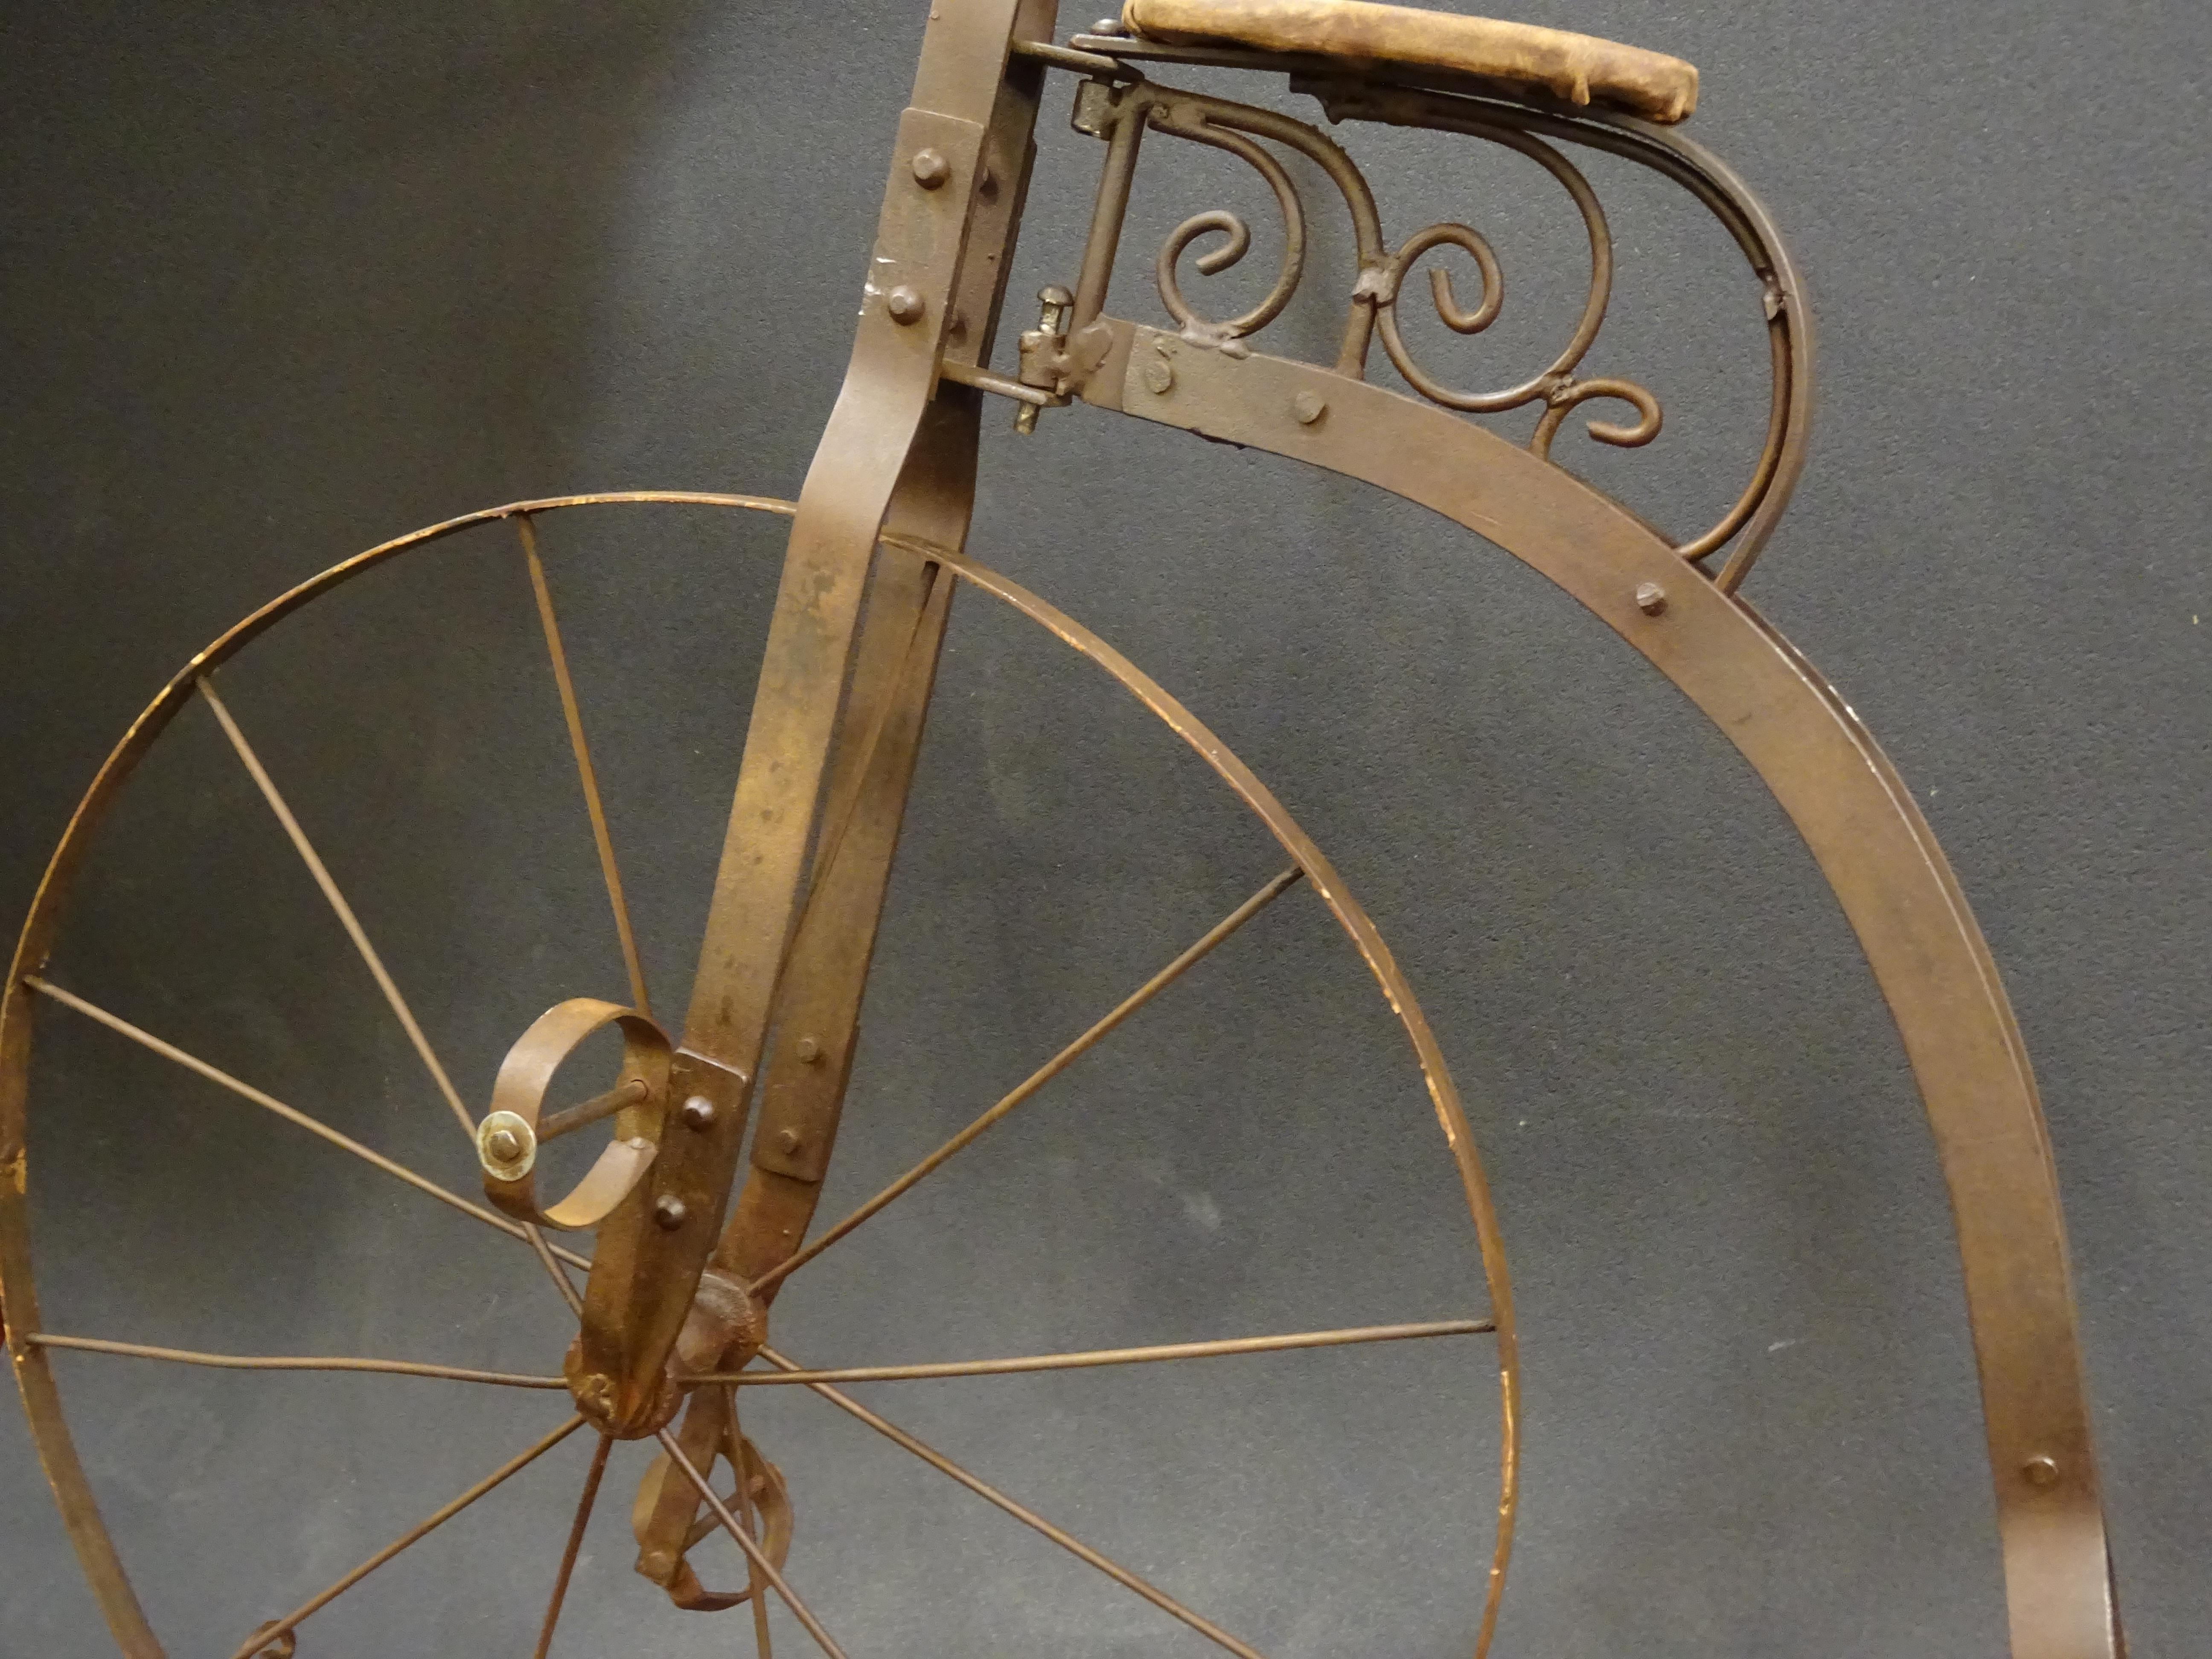 Early 20th Century 1900 Penny-Farthing English  Bycicle , Wrought-Iron, Wood, Leather, for Children